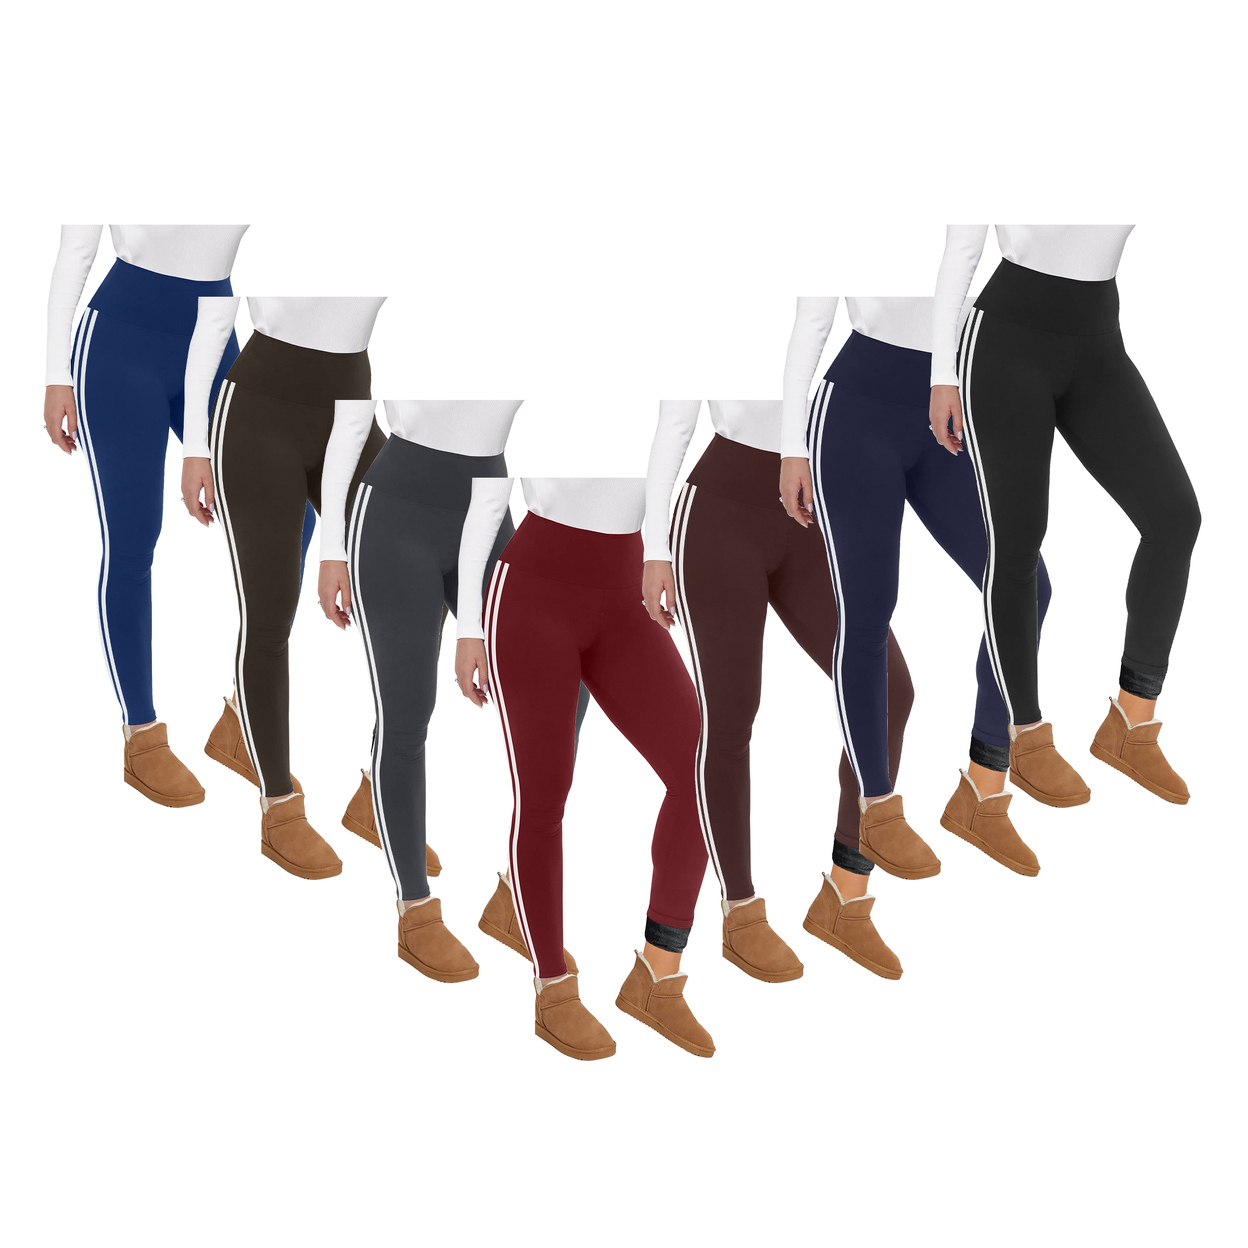 4-Pack: Women's Ultra Soft Winter Warm Cozy Striped Fur Lined Yoga Leggings - Assorted, Small